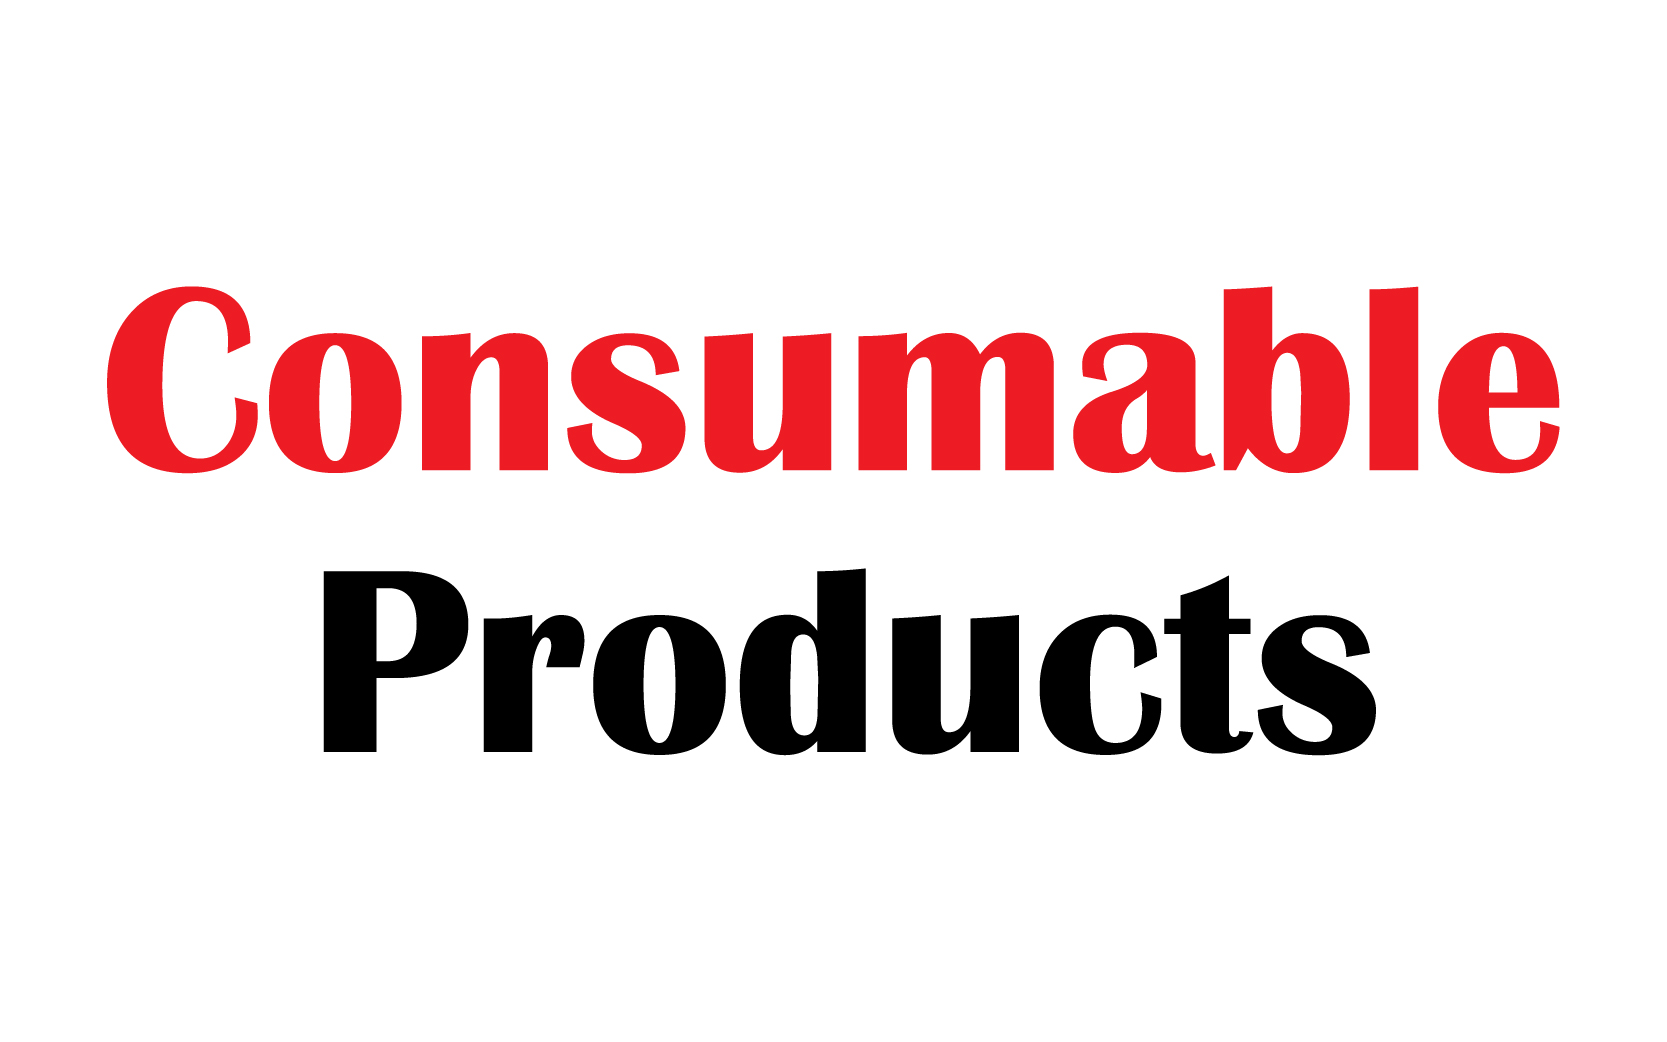 Consumable Product